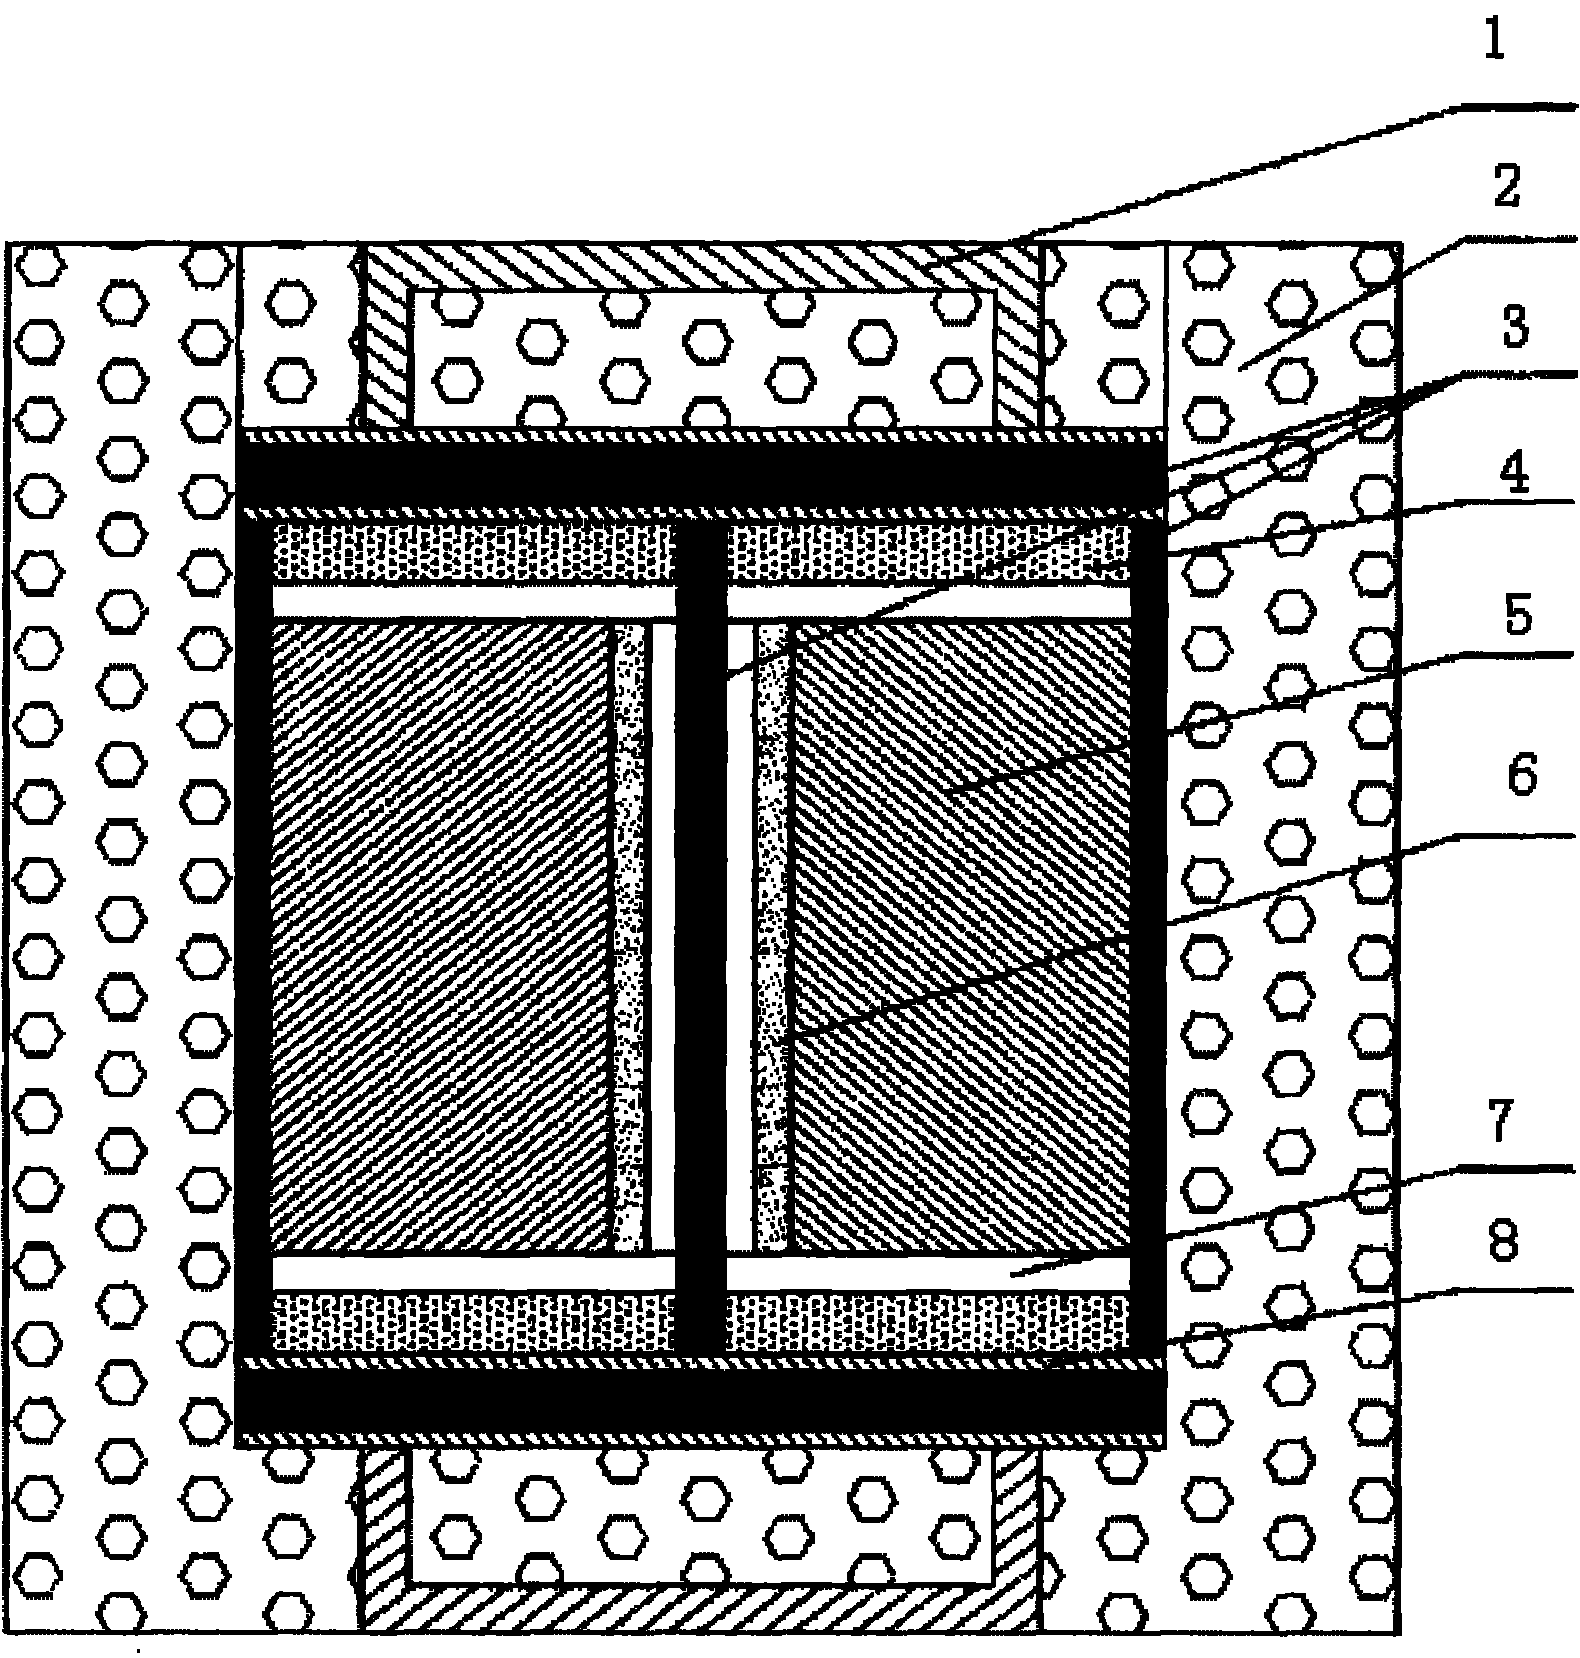 Compound nano cobalt-free hard alloy-polycrystalline cubic boron nitride film and manufacturing method thereof